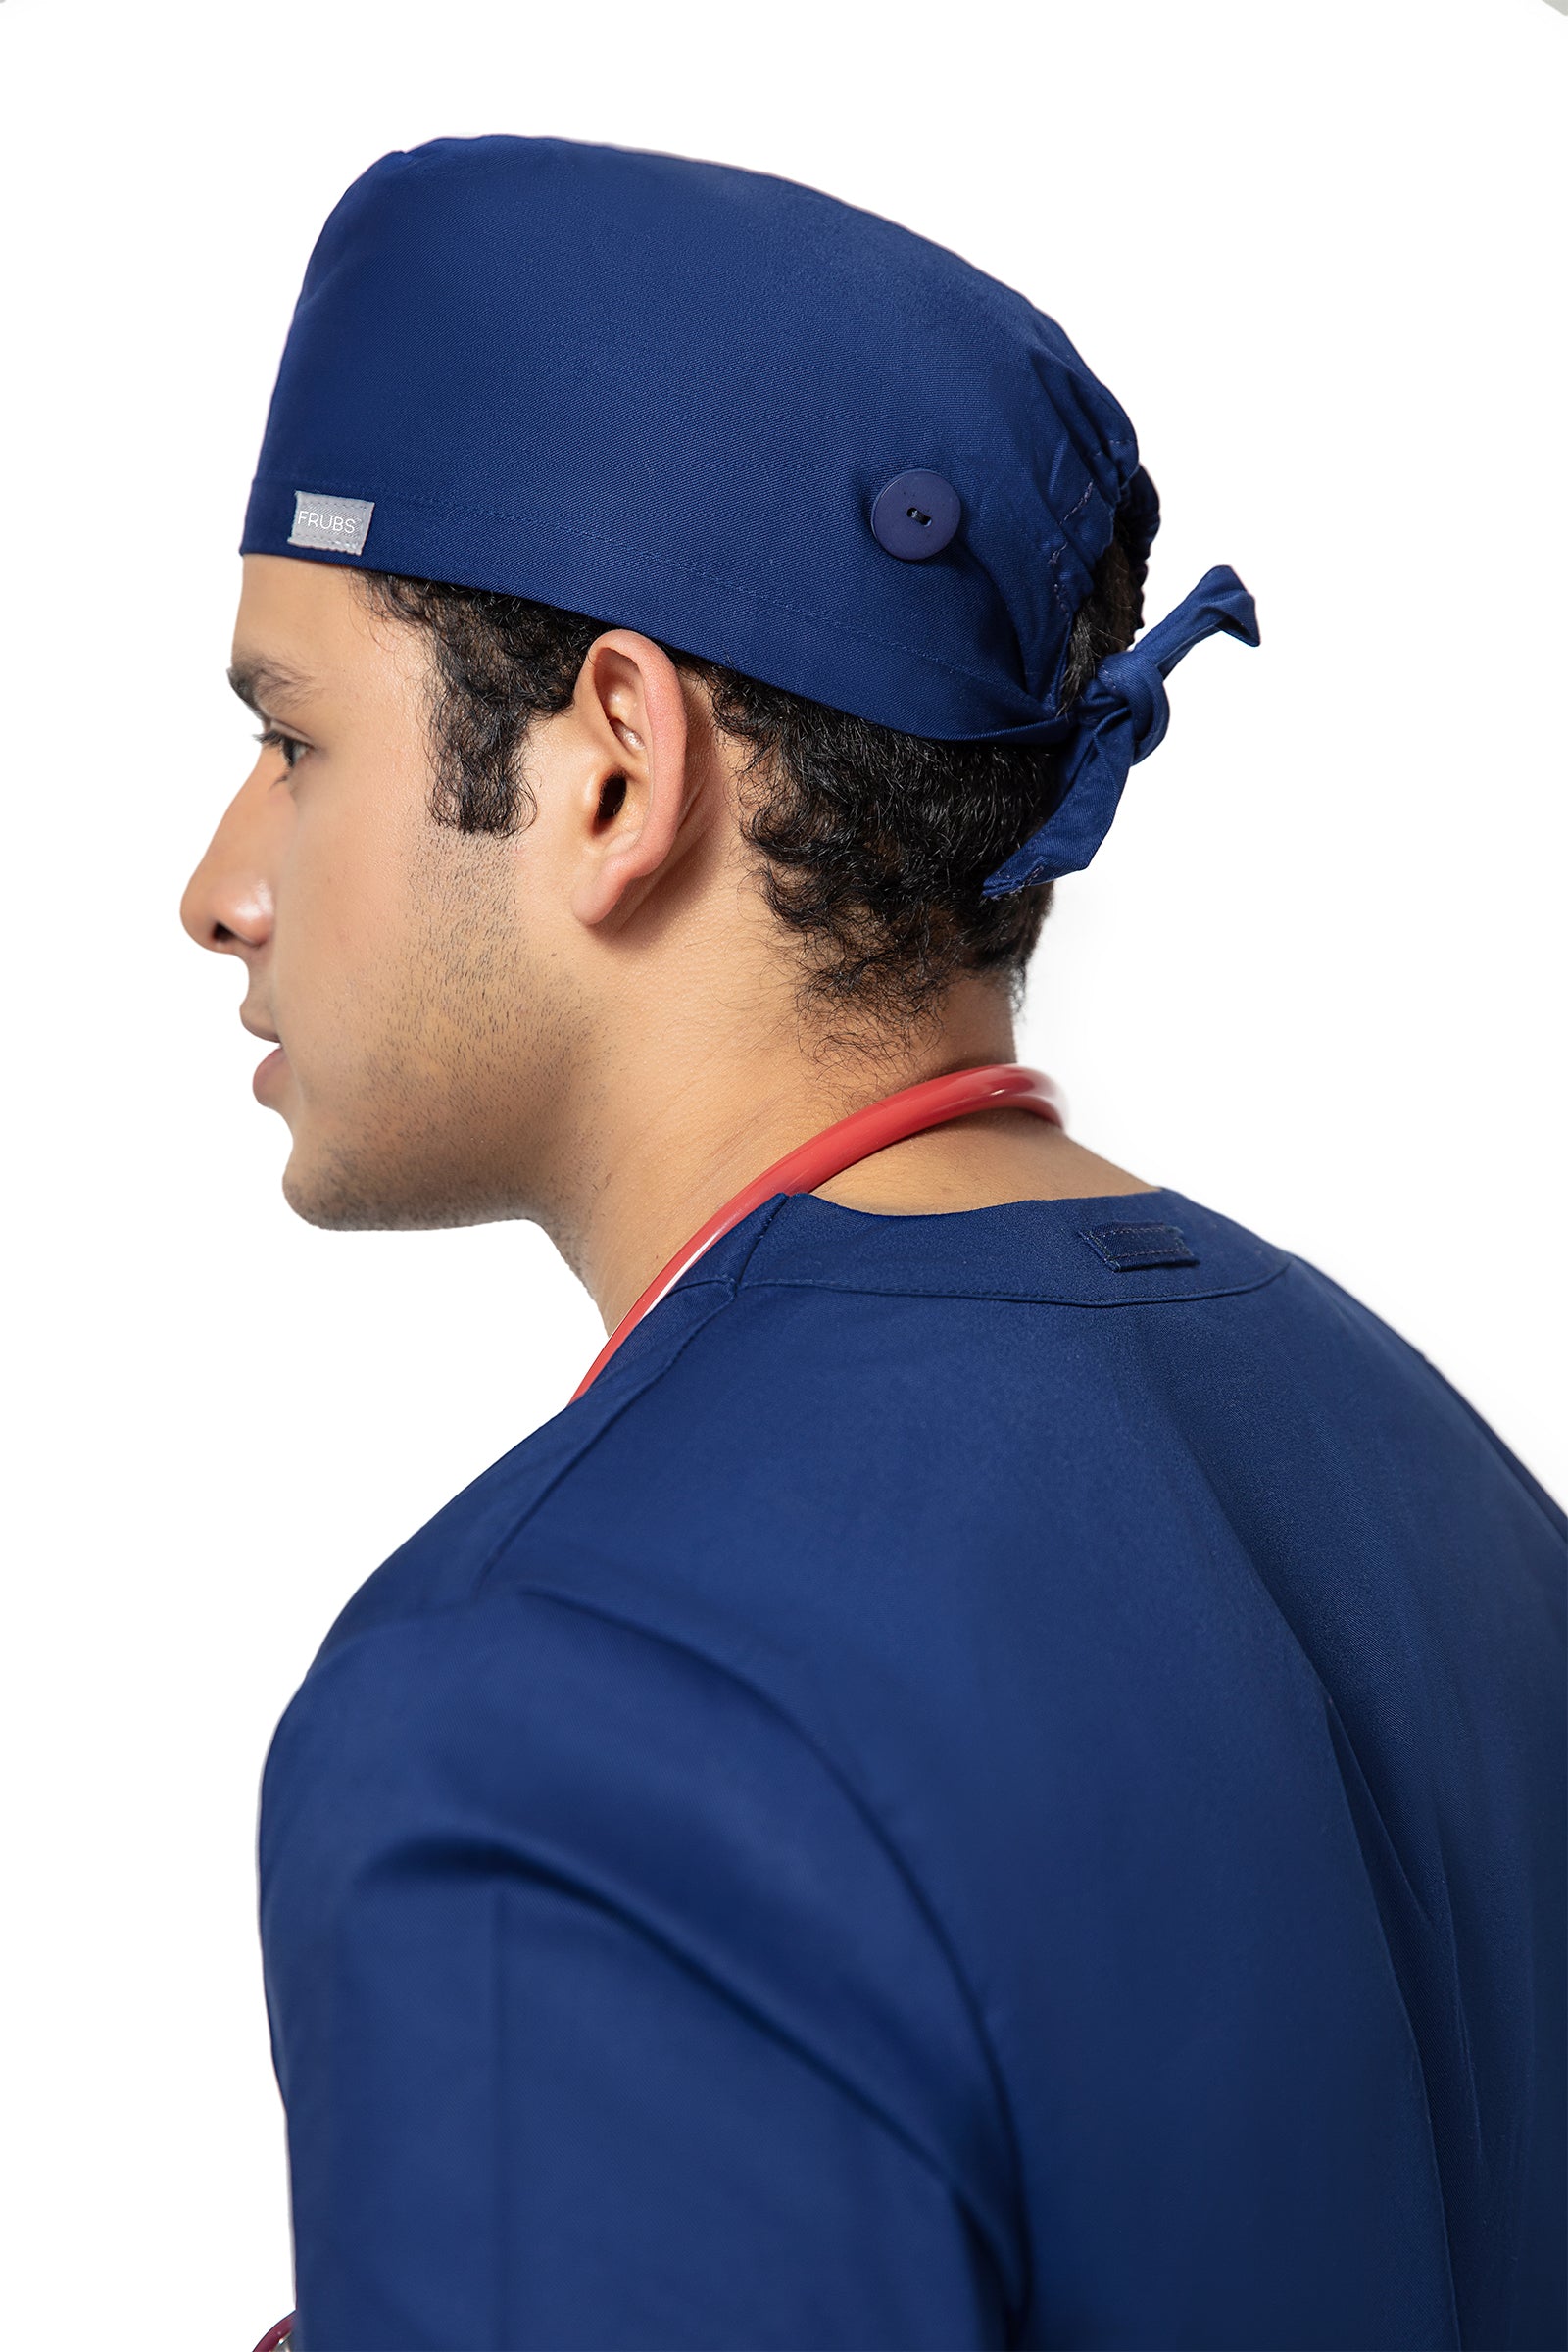 Ozone Blue surgical caps